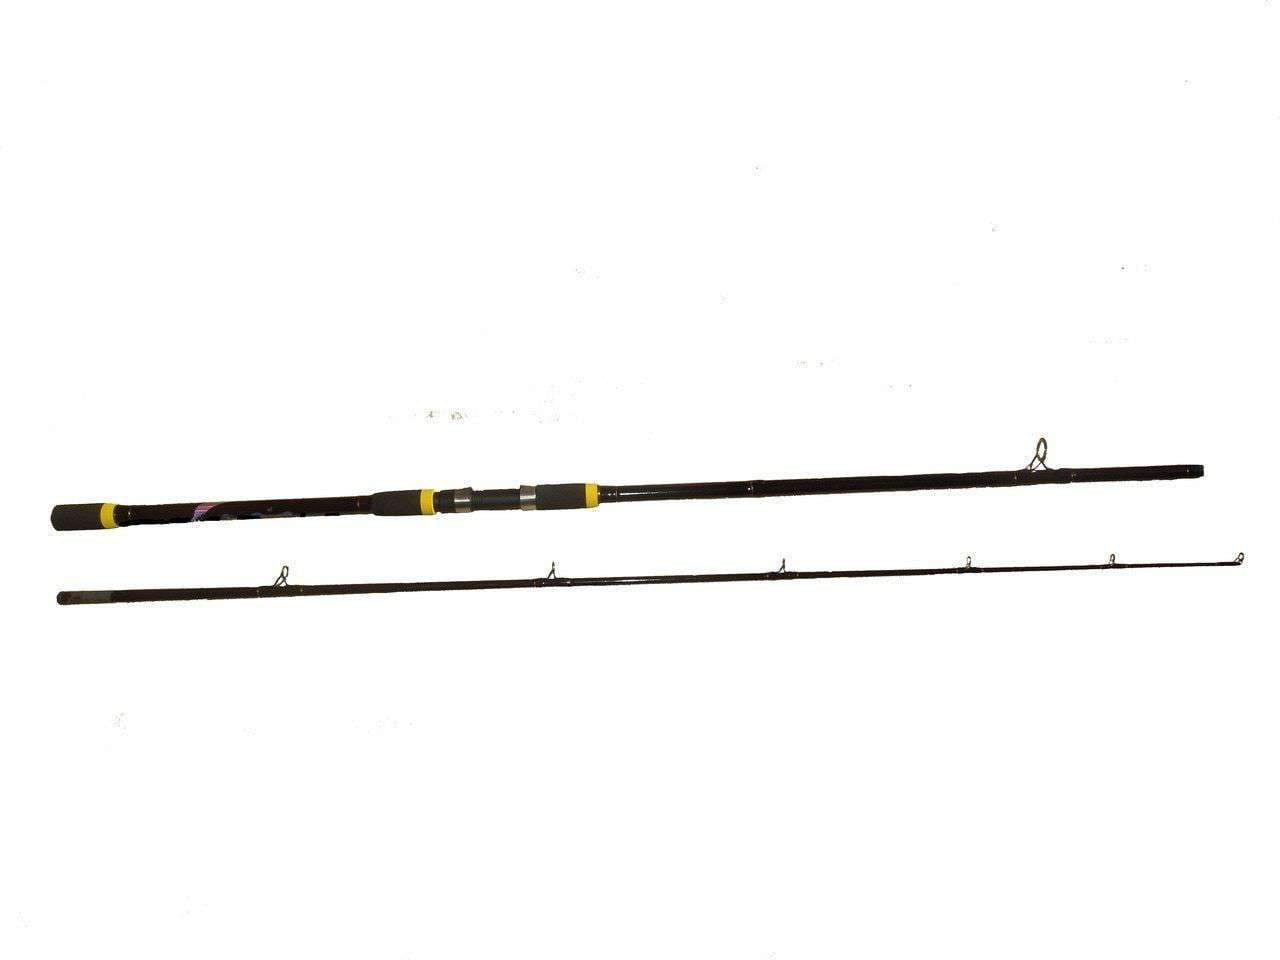 Daiwa Throwing Kite Spinning Prime Surf Fishing Rod 938235 T33-425 W for sale online 